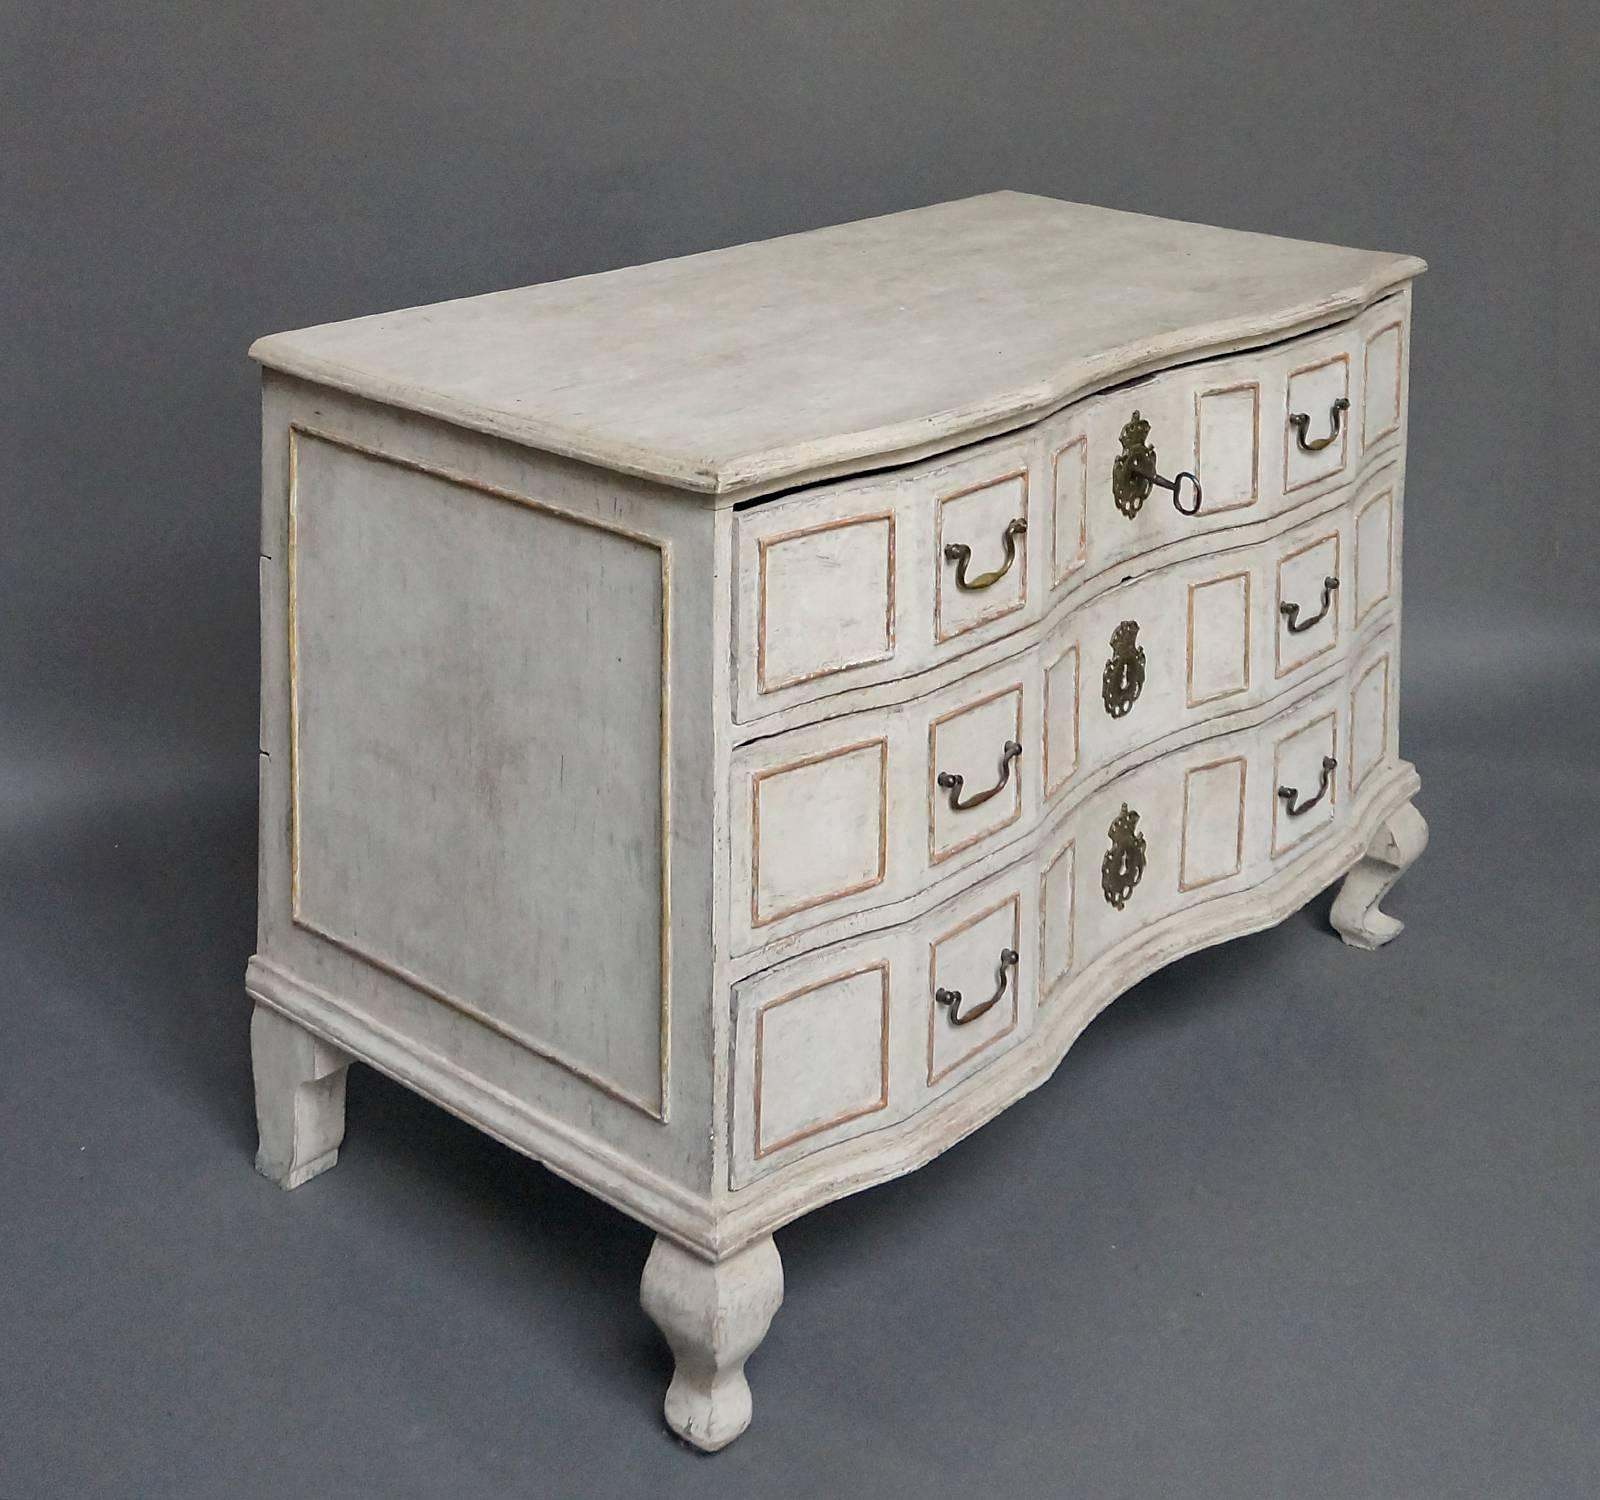 Period Swedish Rococo chest of drawers, circa 1790, with bow-front form. Three-drawers with framed panels under a shaped top. Original brass escutcheons with crown detail. Large framed panels on the sides above compressed cabriole legs.